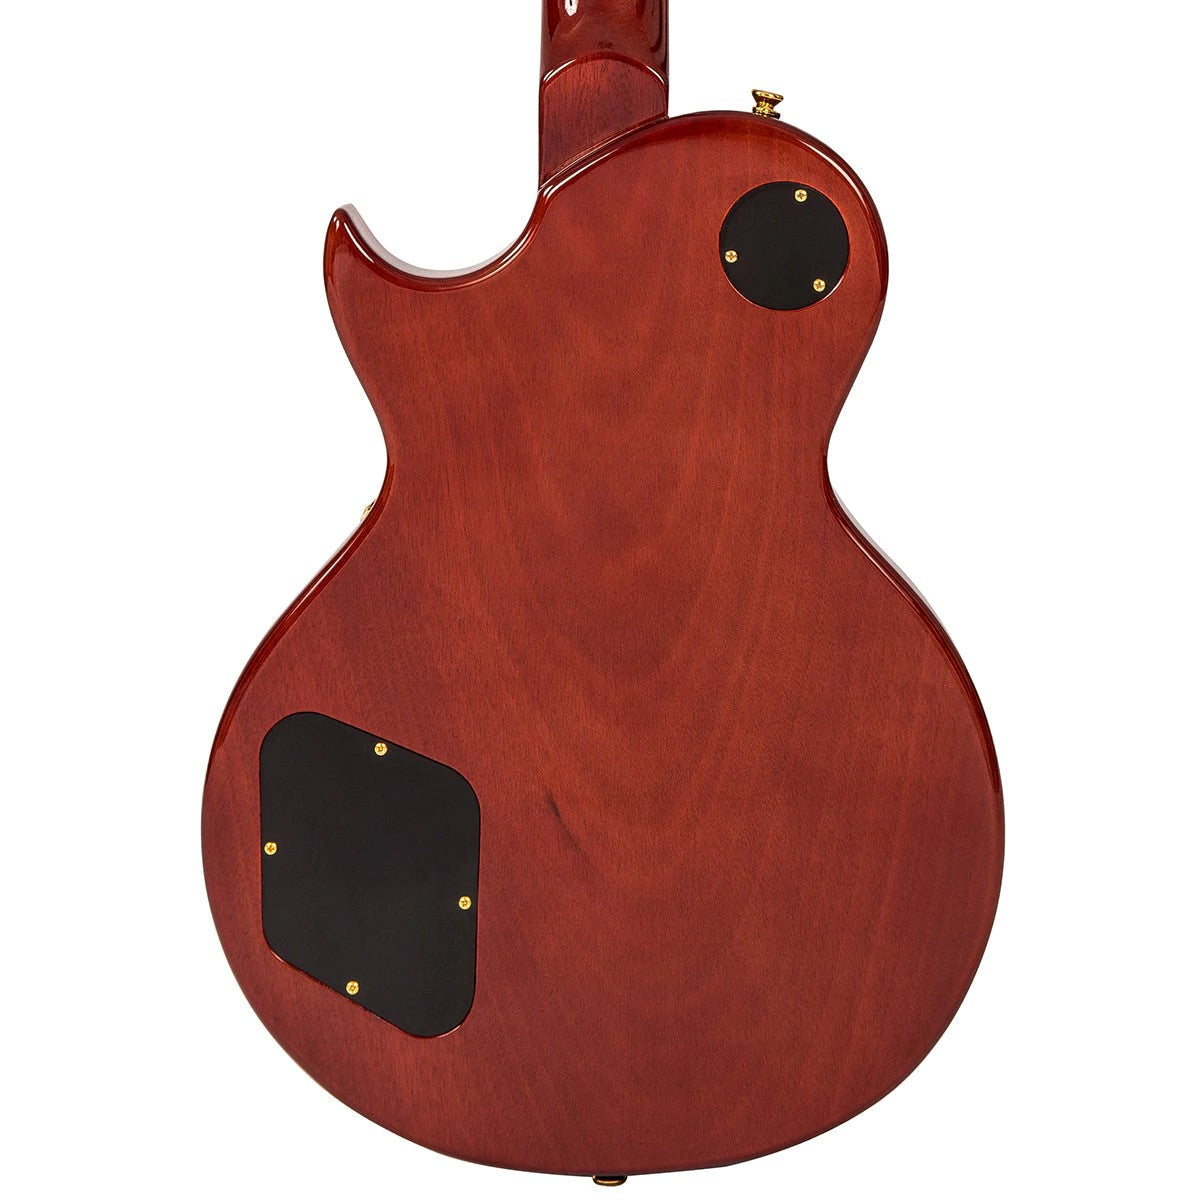 Vintage V100M Mini Humbucker ReIssued Electric Guitar ~ Wine Red, Electric Guitar for sale at Richards Guitars.